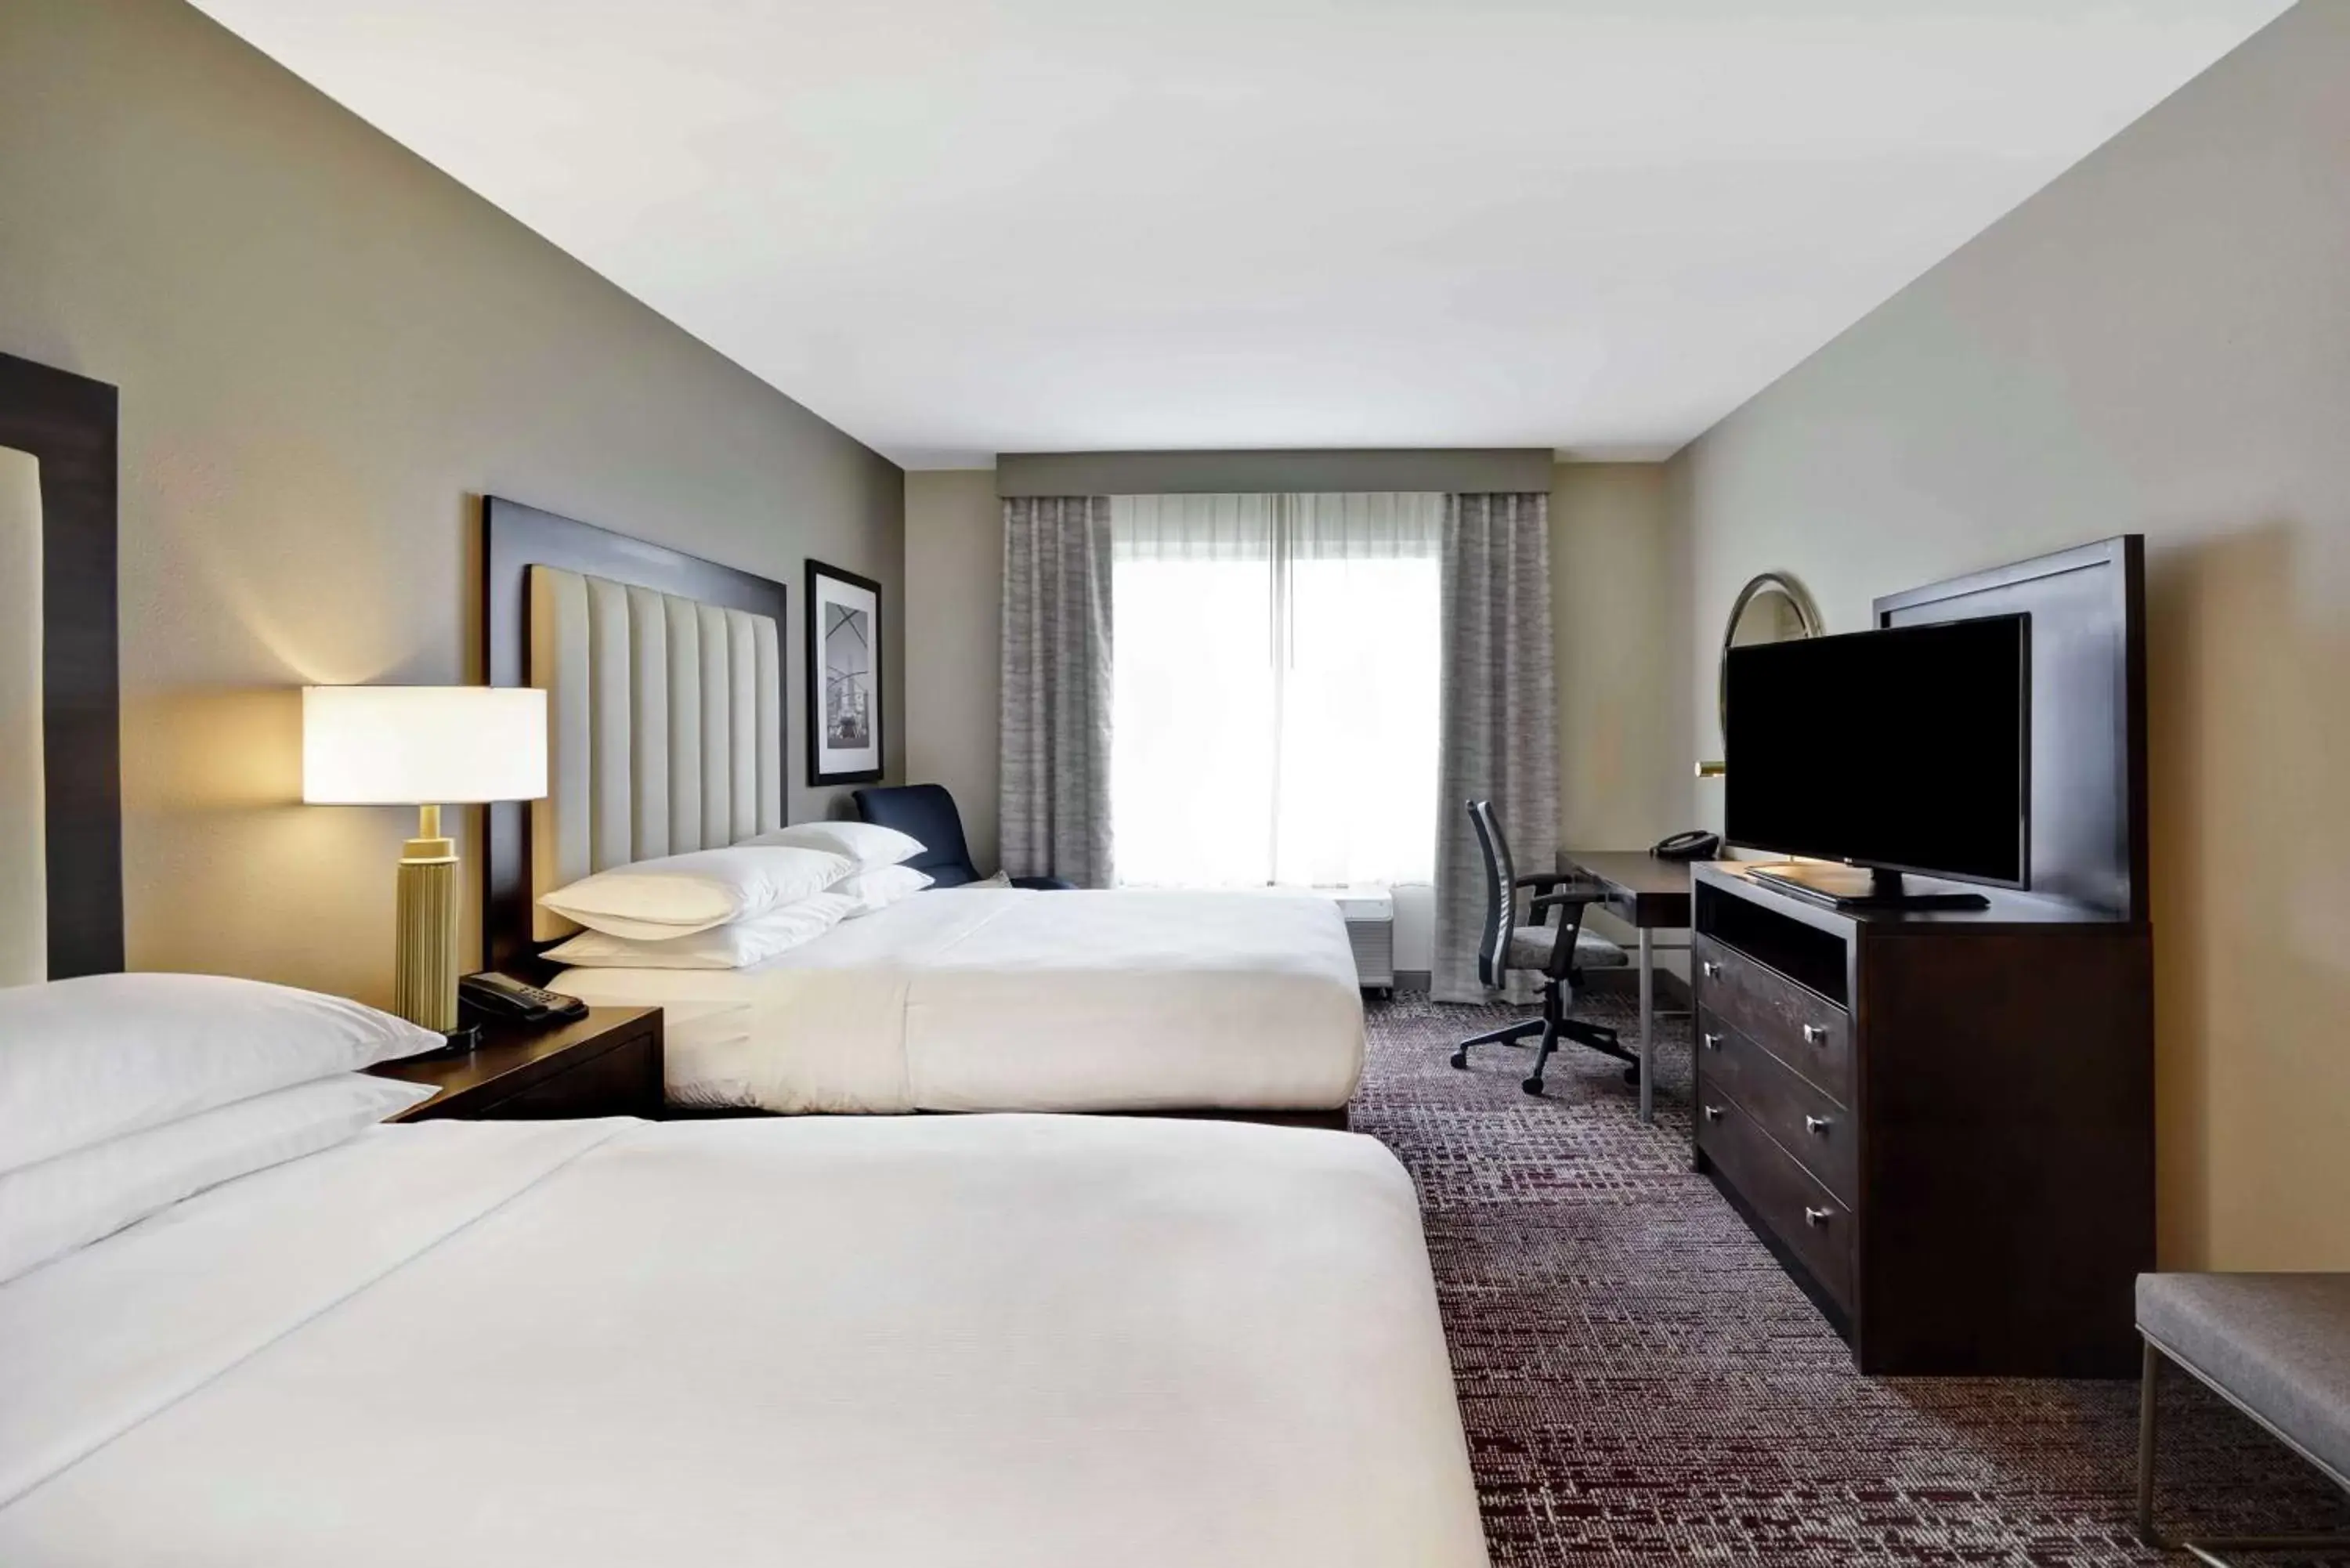 Bed, TV/Entertainment Center in DoubleTree by Hilton Chicago Midway Airport, IL